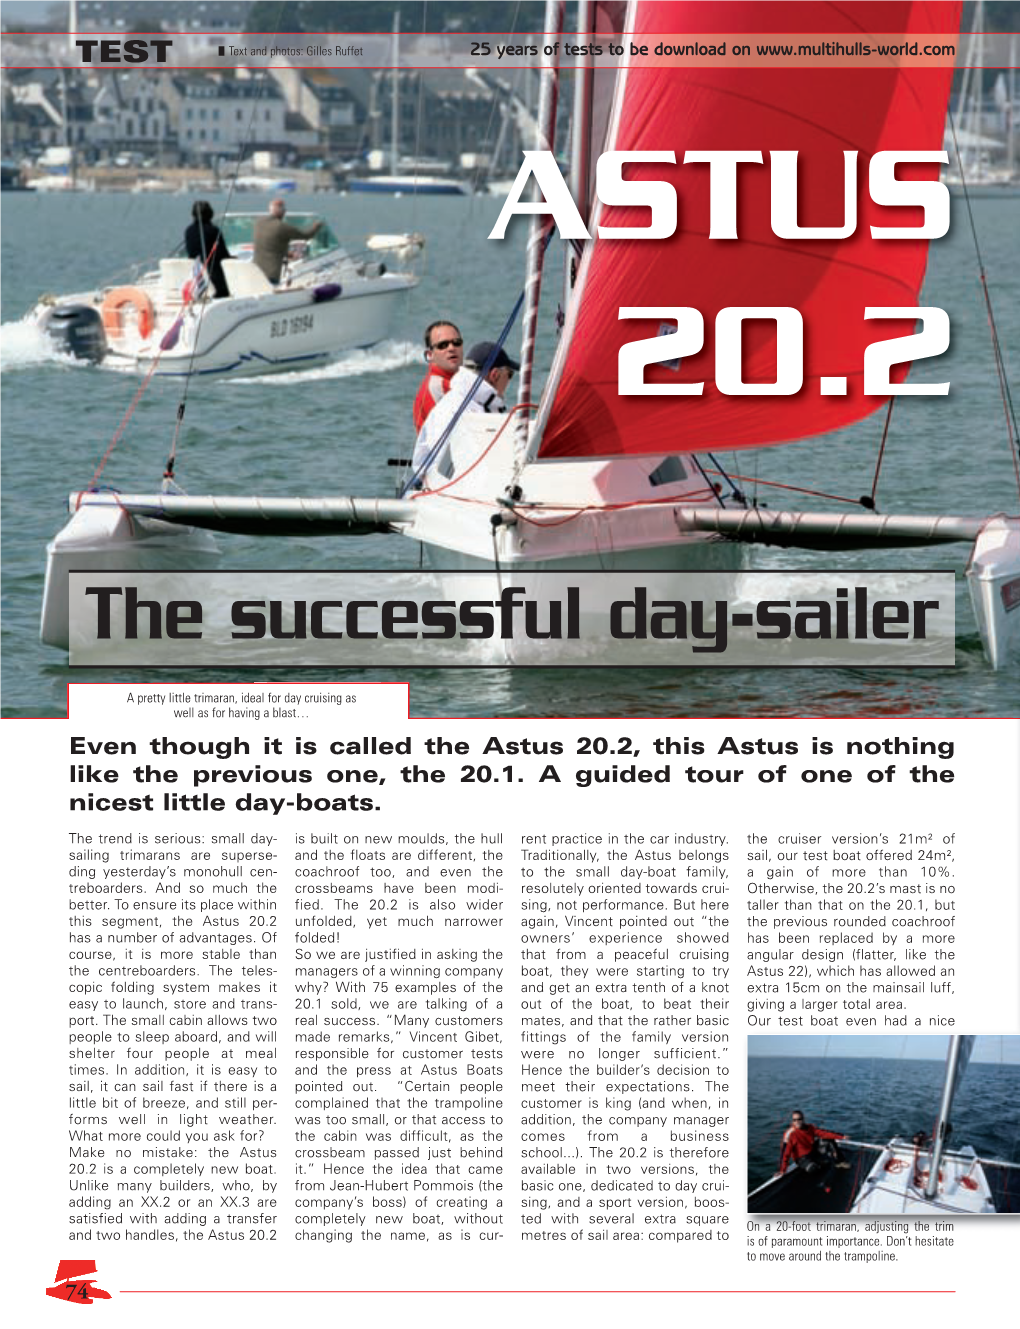 The Successful Day-Sailer